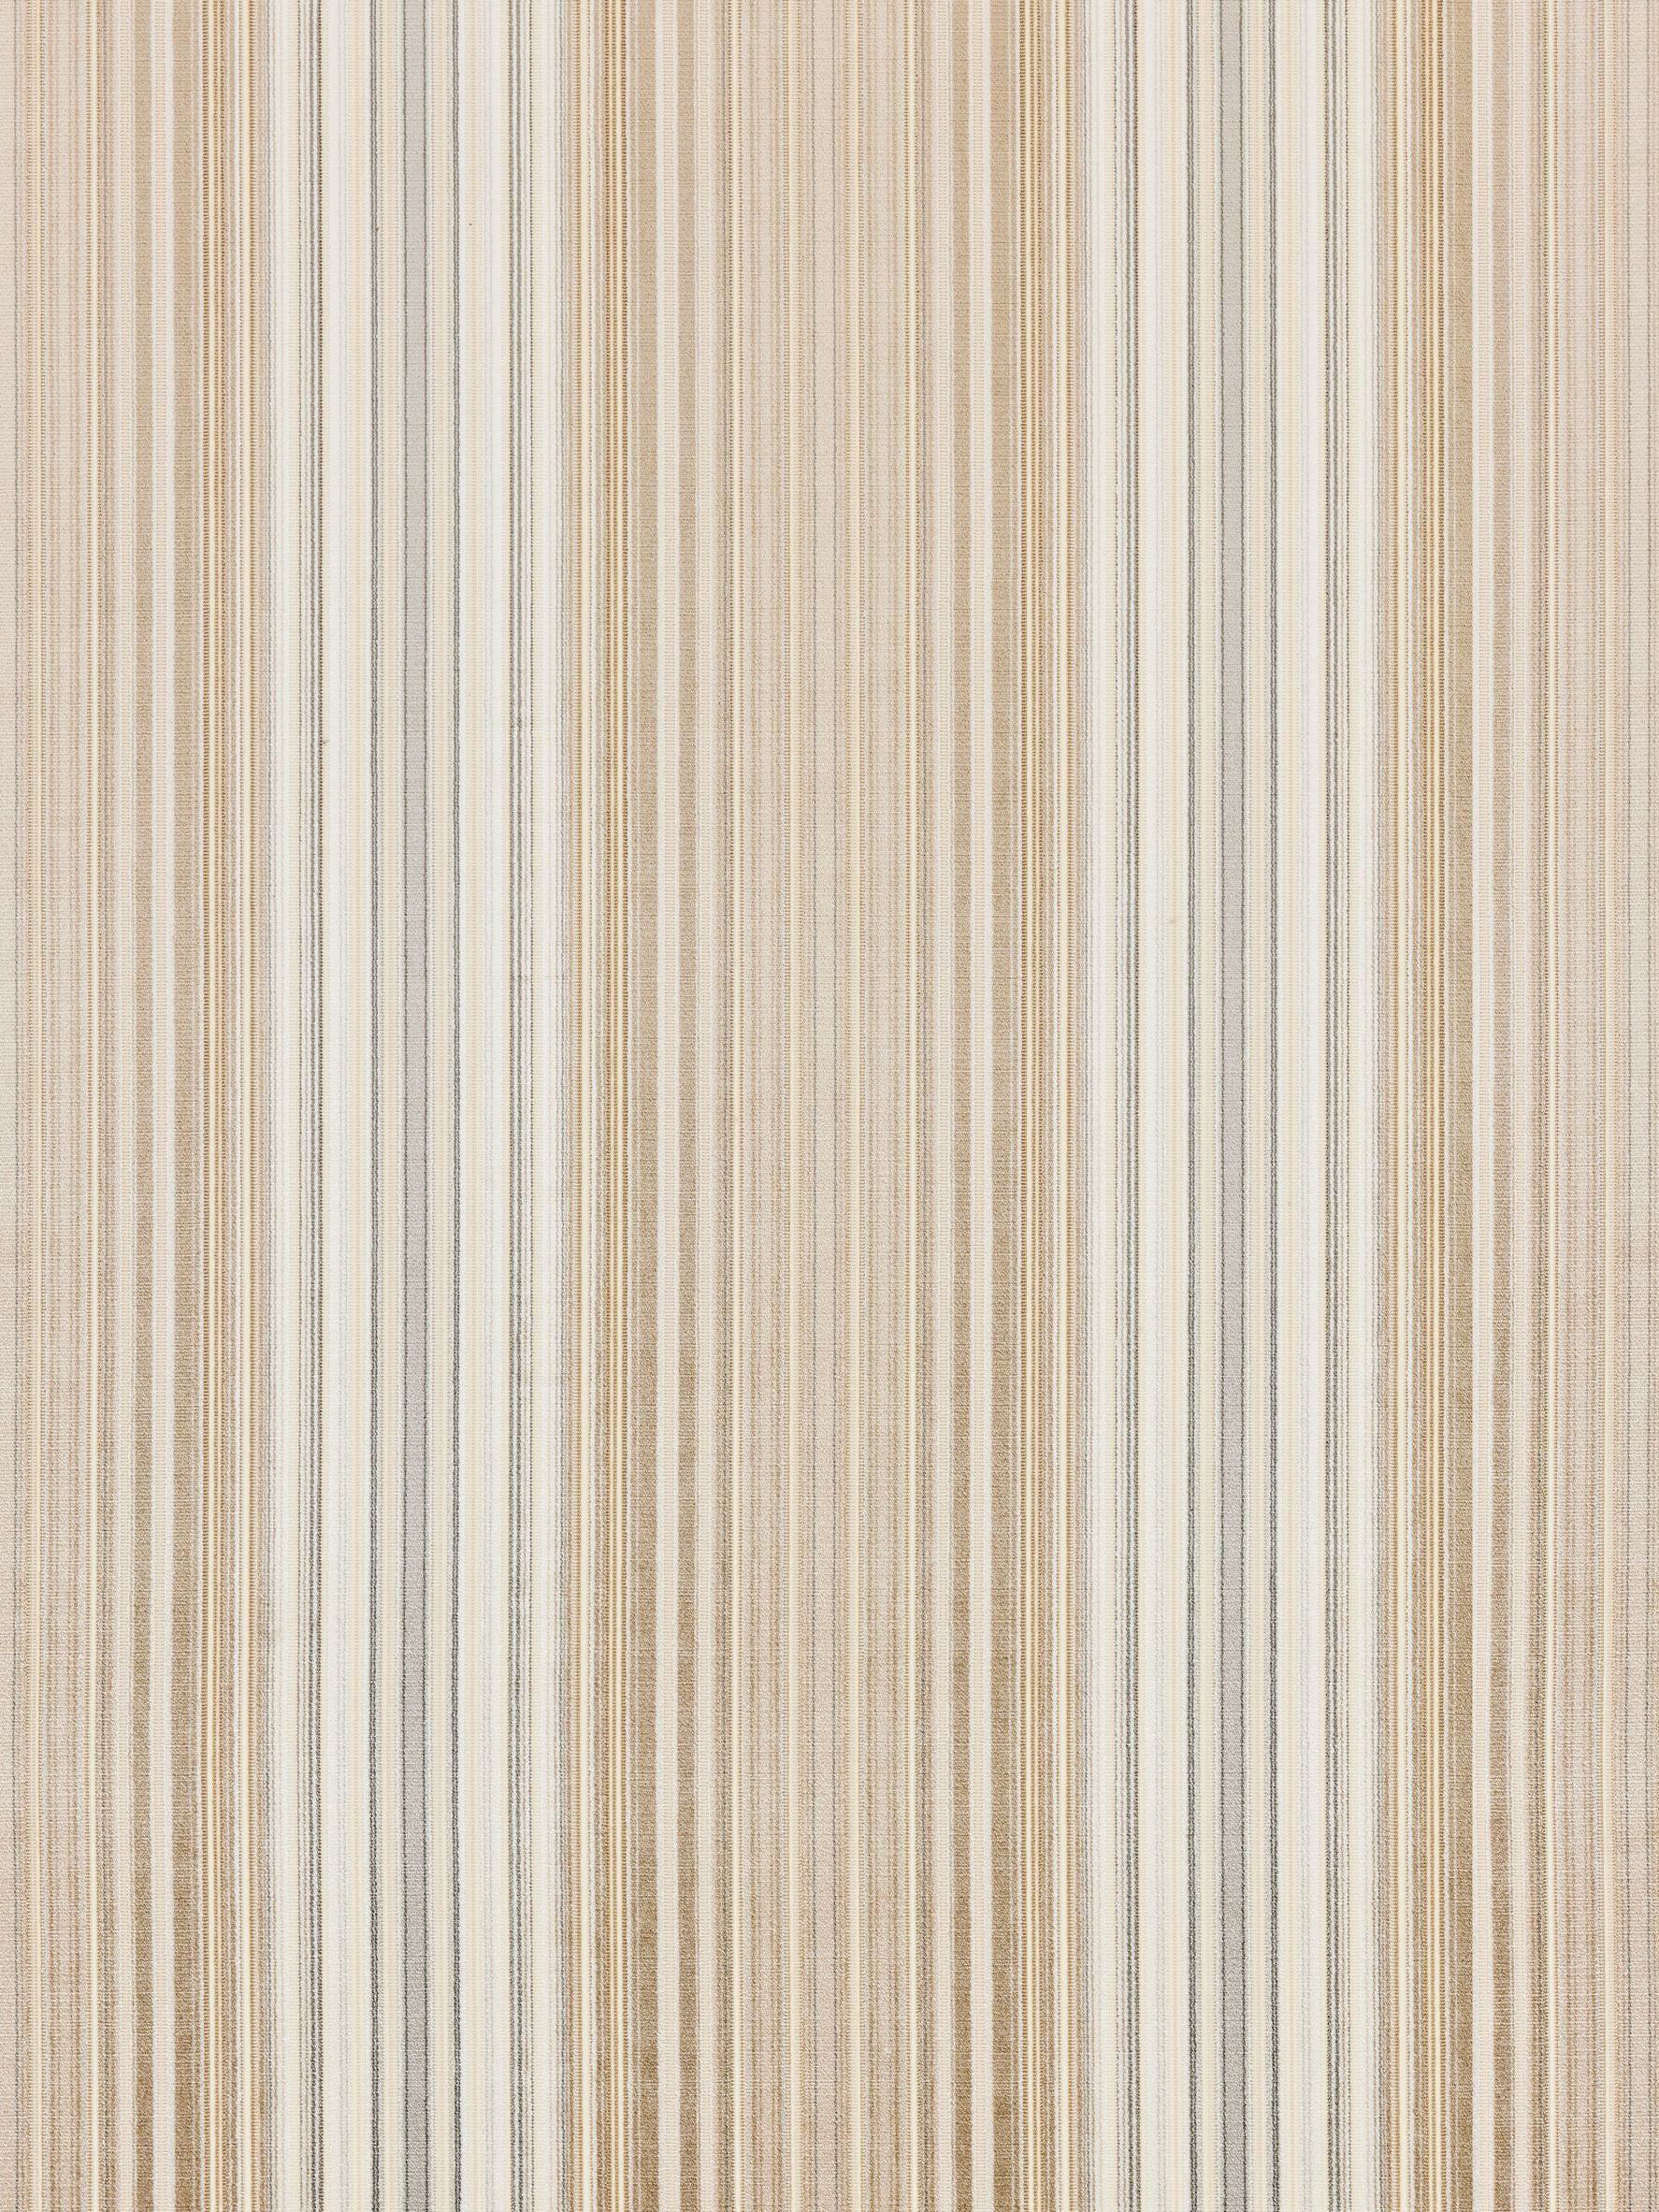 Timberlake Velvet fabric in travertine color - pattern number JM 00040592 - by Scalamandre in the Old World Weavers collection